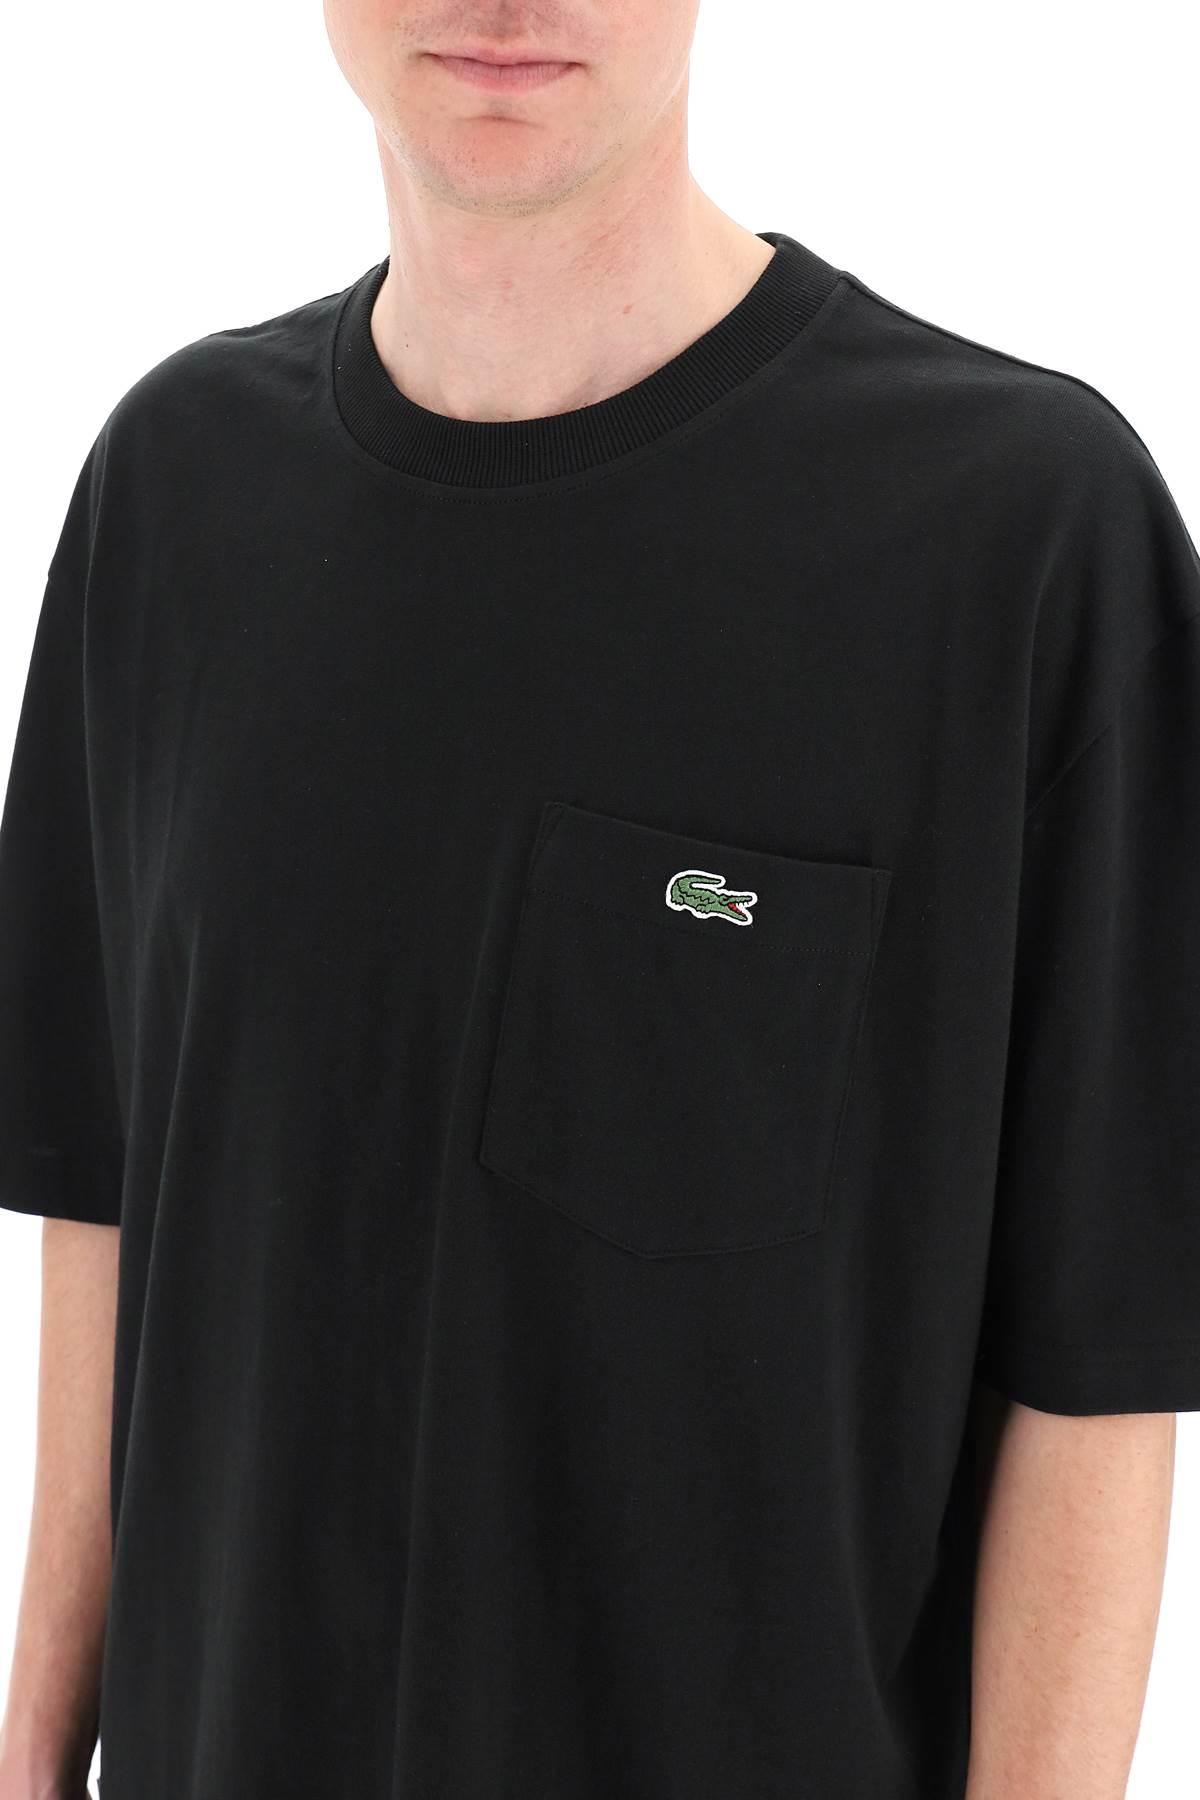 Lacoste L!ive Print in Black for Lyst